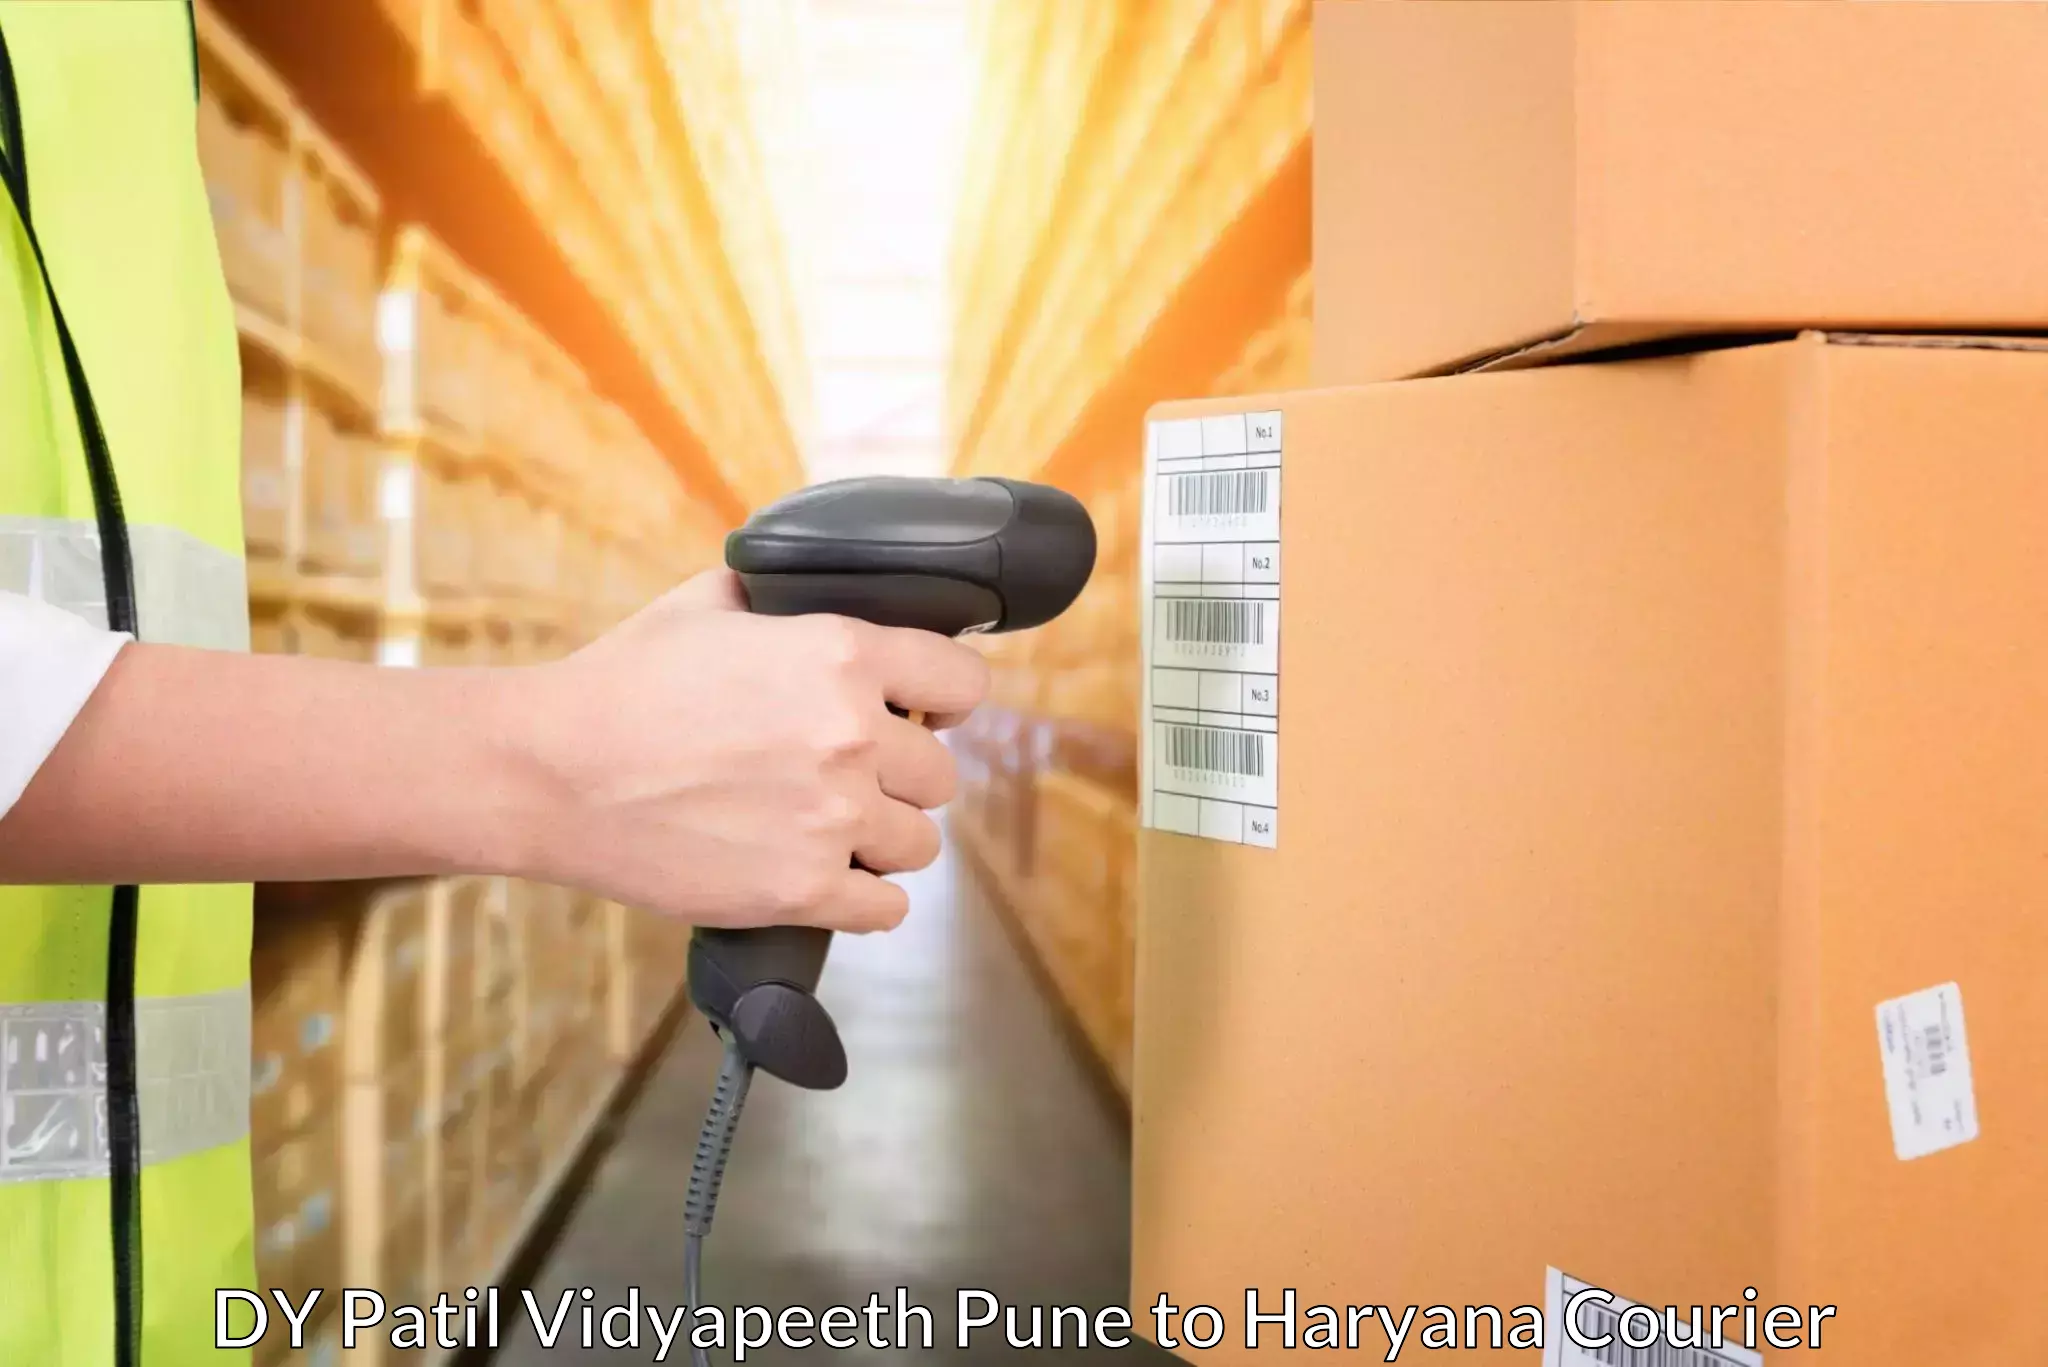 Affordable logistics services DY Patil Vidyapeeth Pune to Bilaspur Haryana